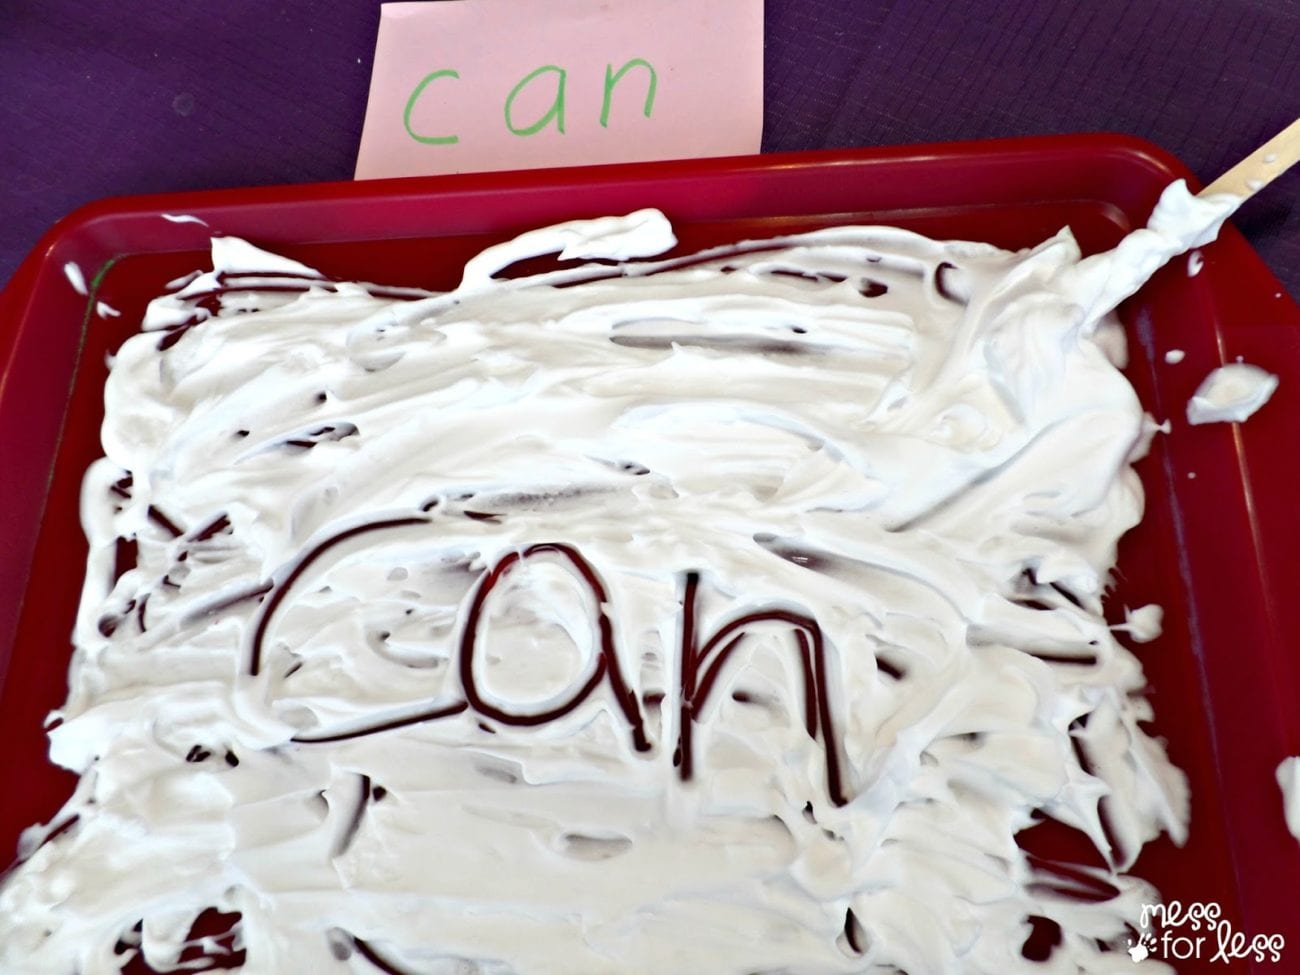 A tray of shaving cream with the word 